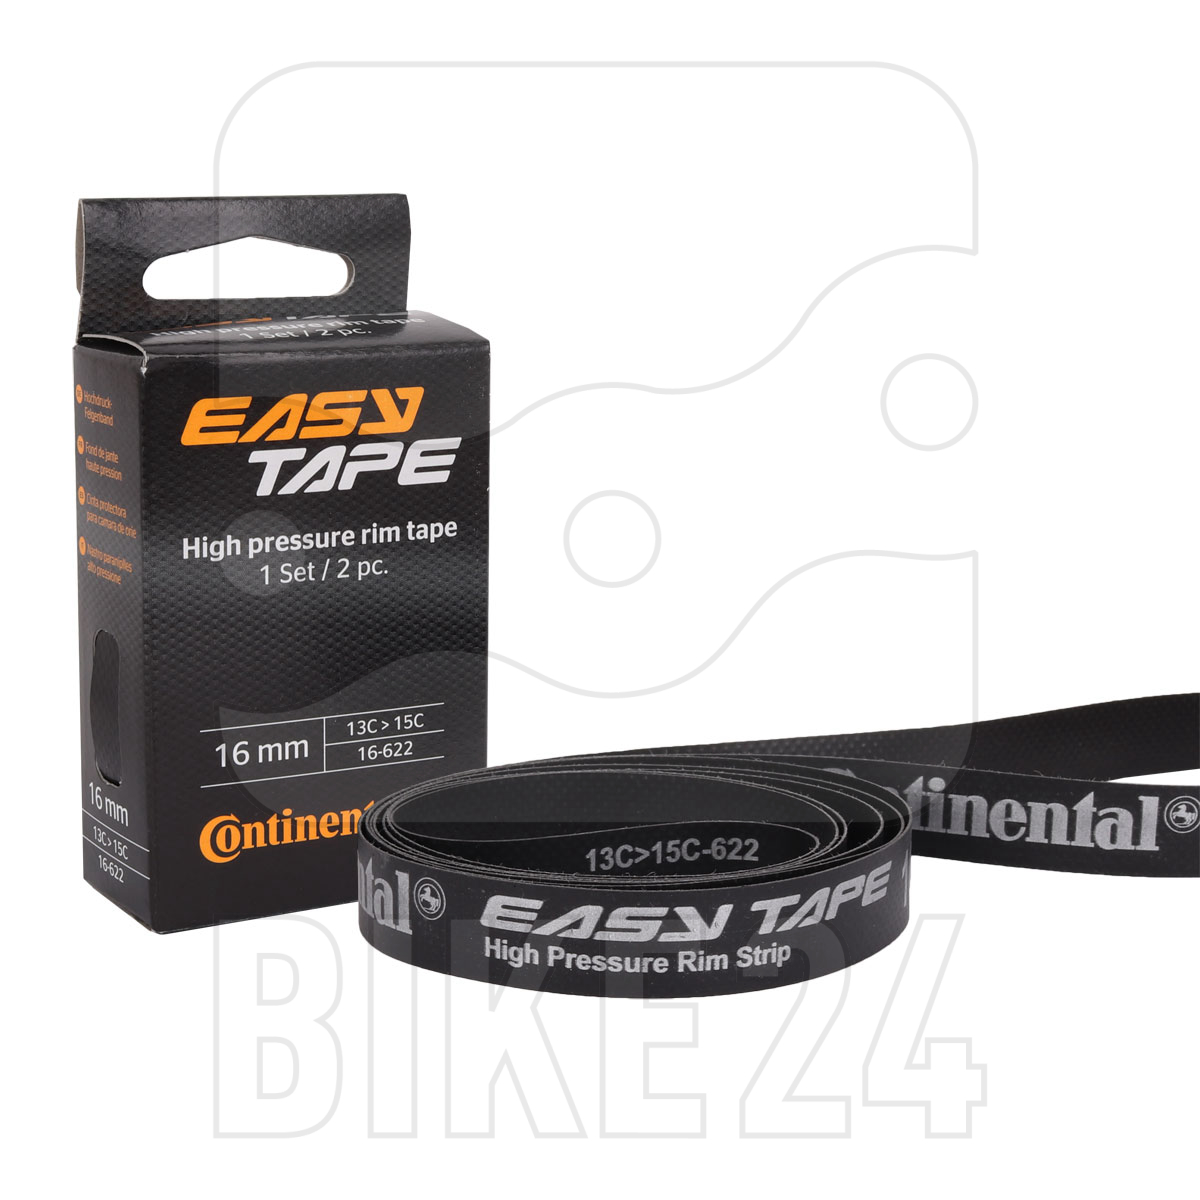 Picture of Continental Easy Tape High Pressure Rim Tape up to 15 bar - 2 pieces